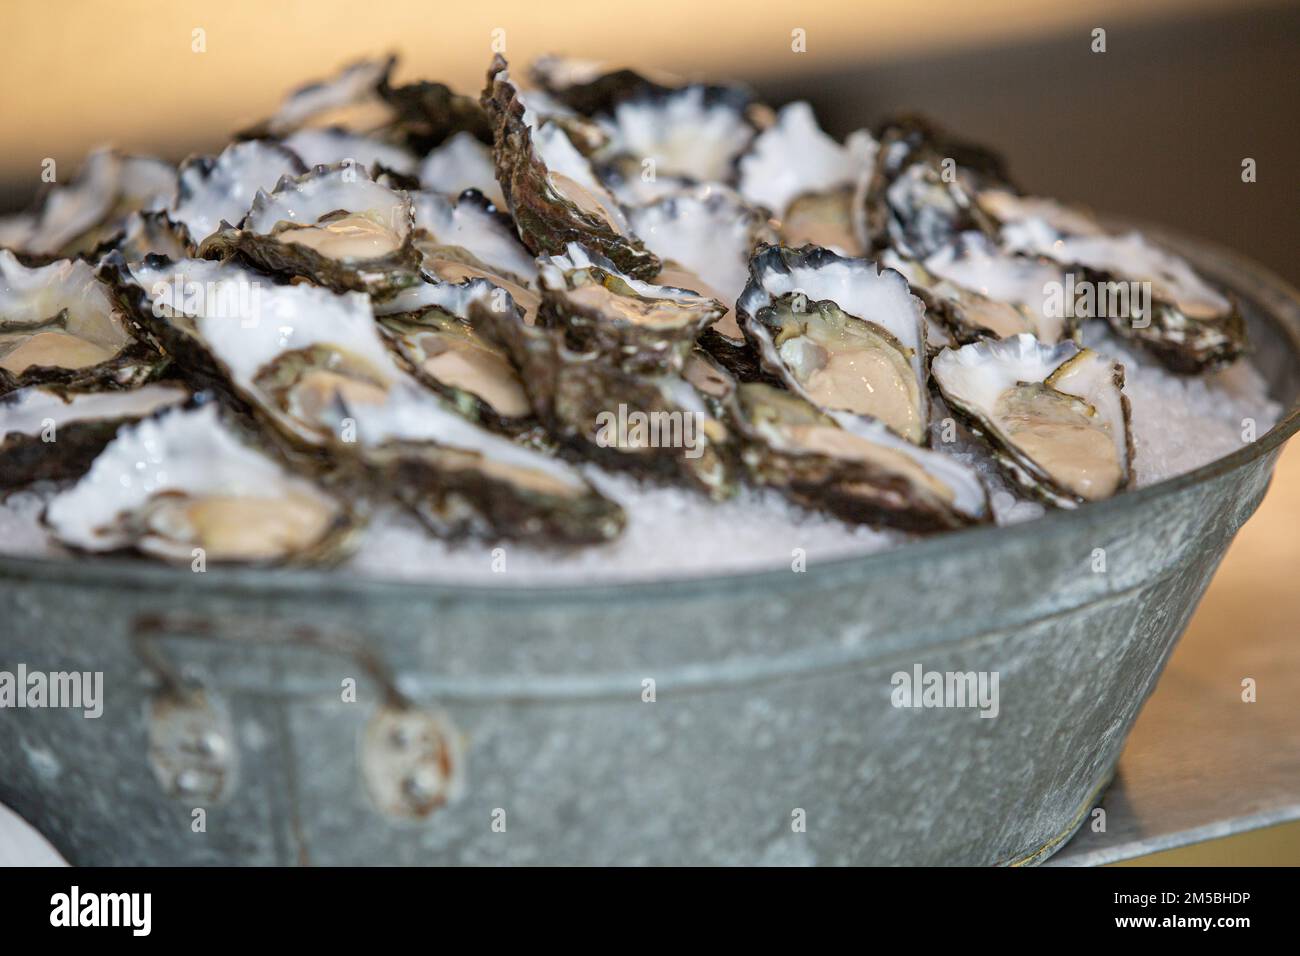 Shucked oysters at a corporate function Stock Photo